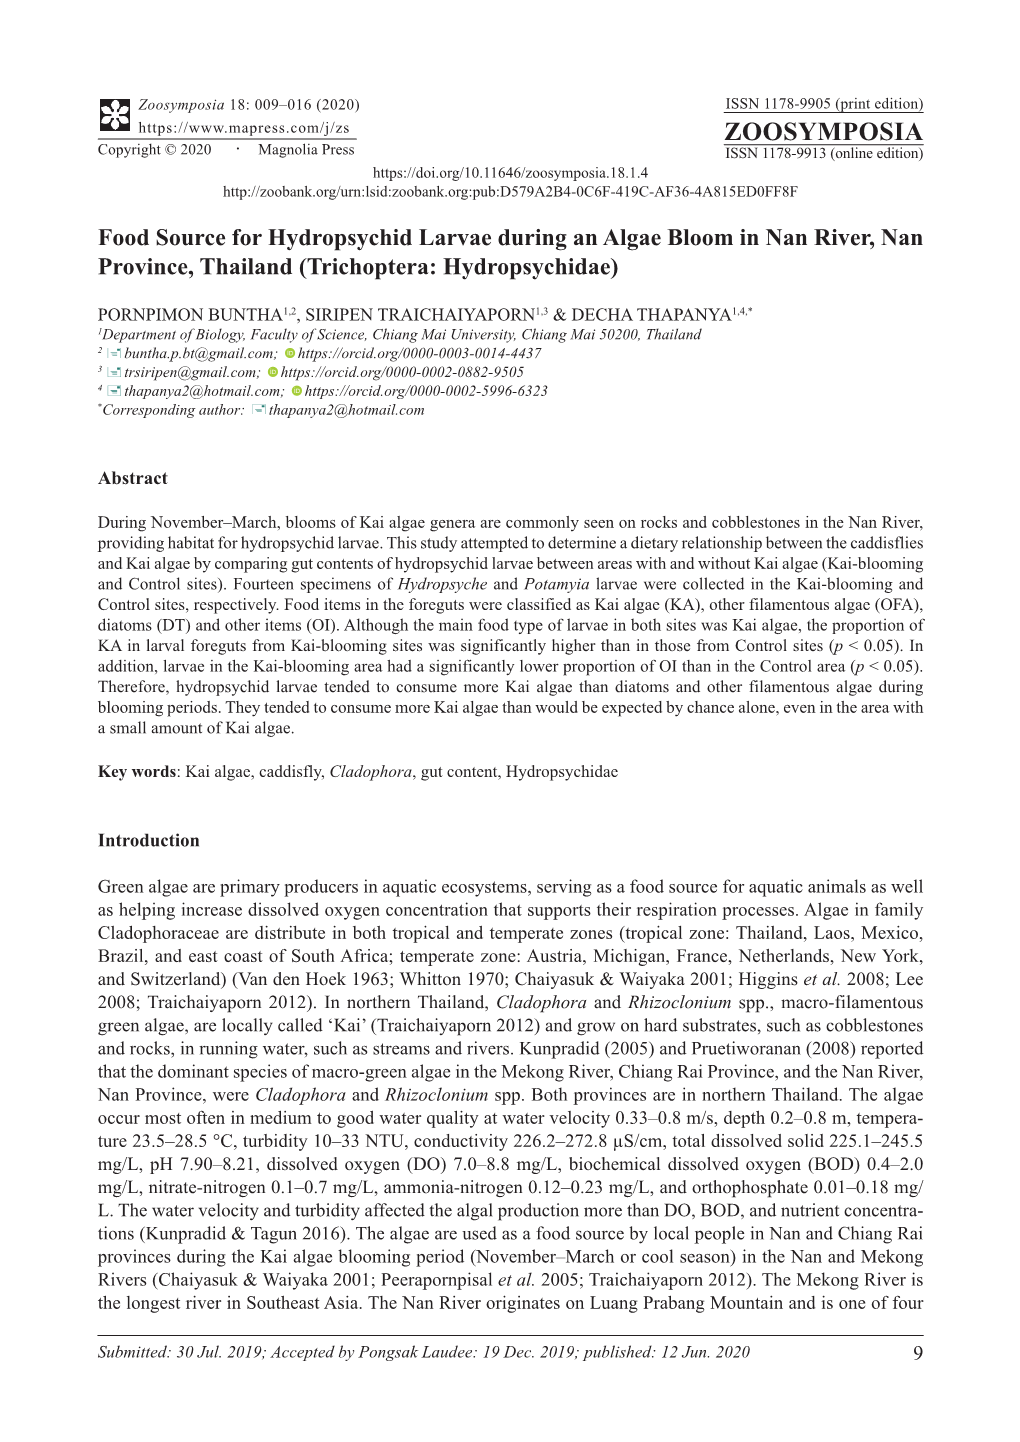 Food Source for Hydropsychid Larvae During an Algae Bloom in Nan River, Nan Province, Thailand (Trichoptera: Hydropsychidae)